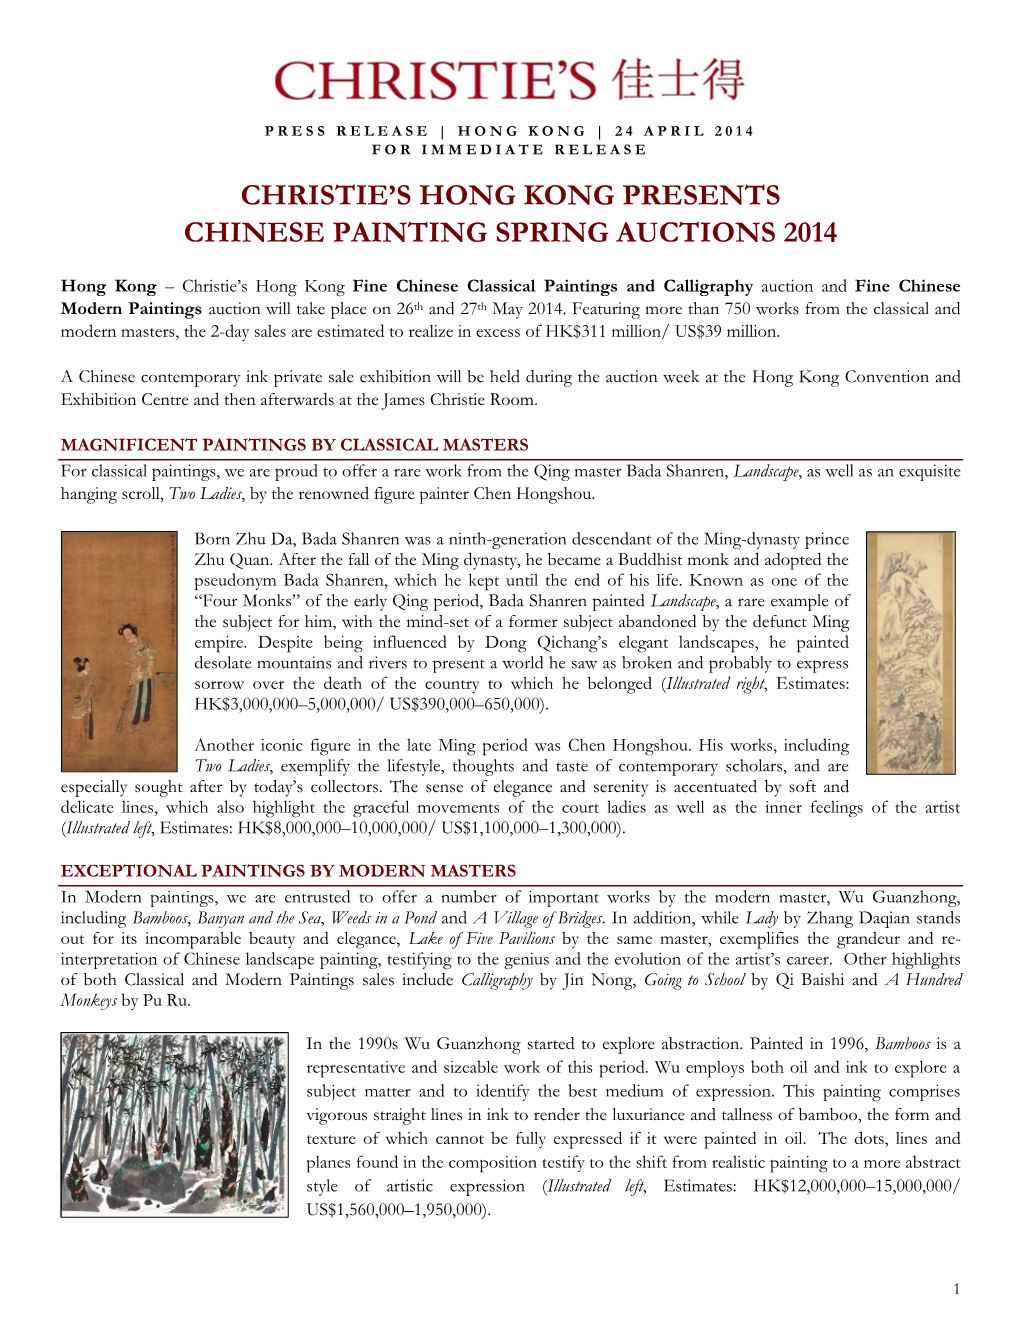 Christie's Hong Kong Presents Chinese Painting